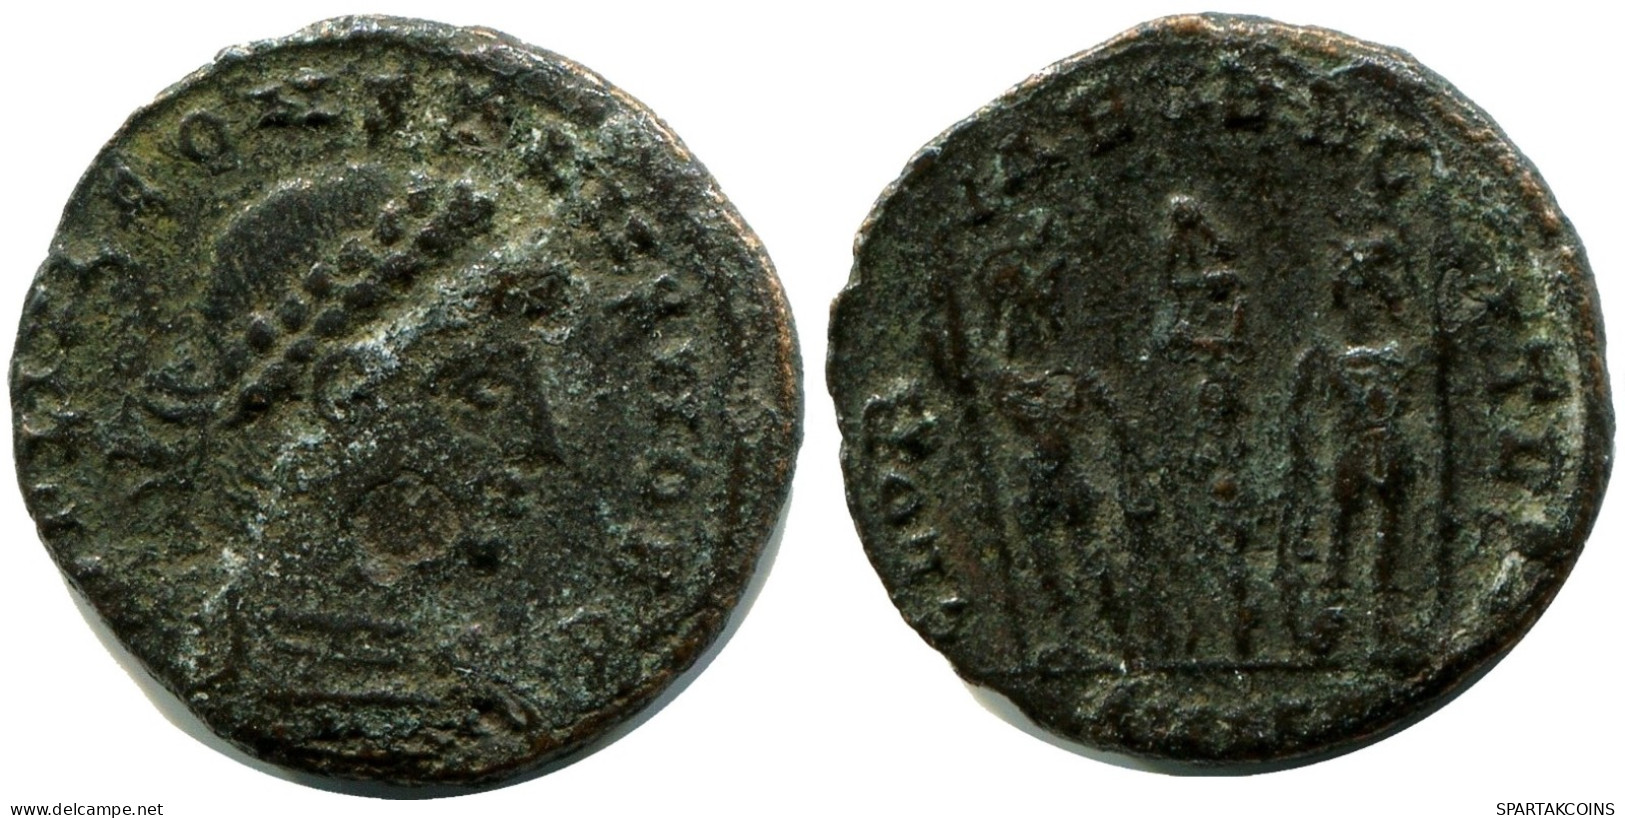 CONSTANS MINTED IN ALEKSANDRIA FROM THE ROYAL ONTARIO MUSEUM #ANC11401.14.F.A - L'Empire Chrétien (307 à 363)